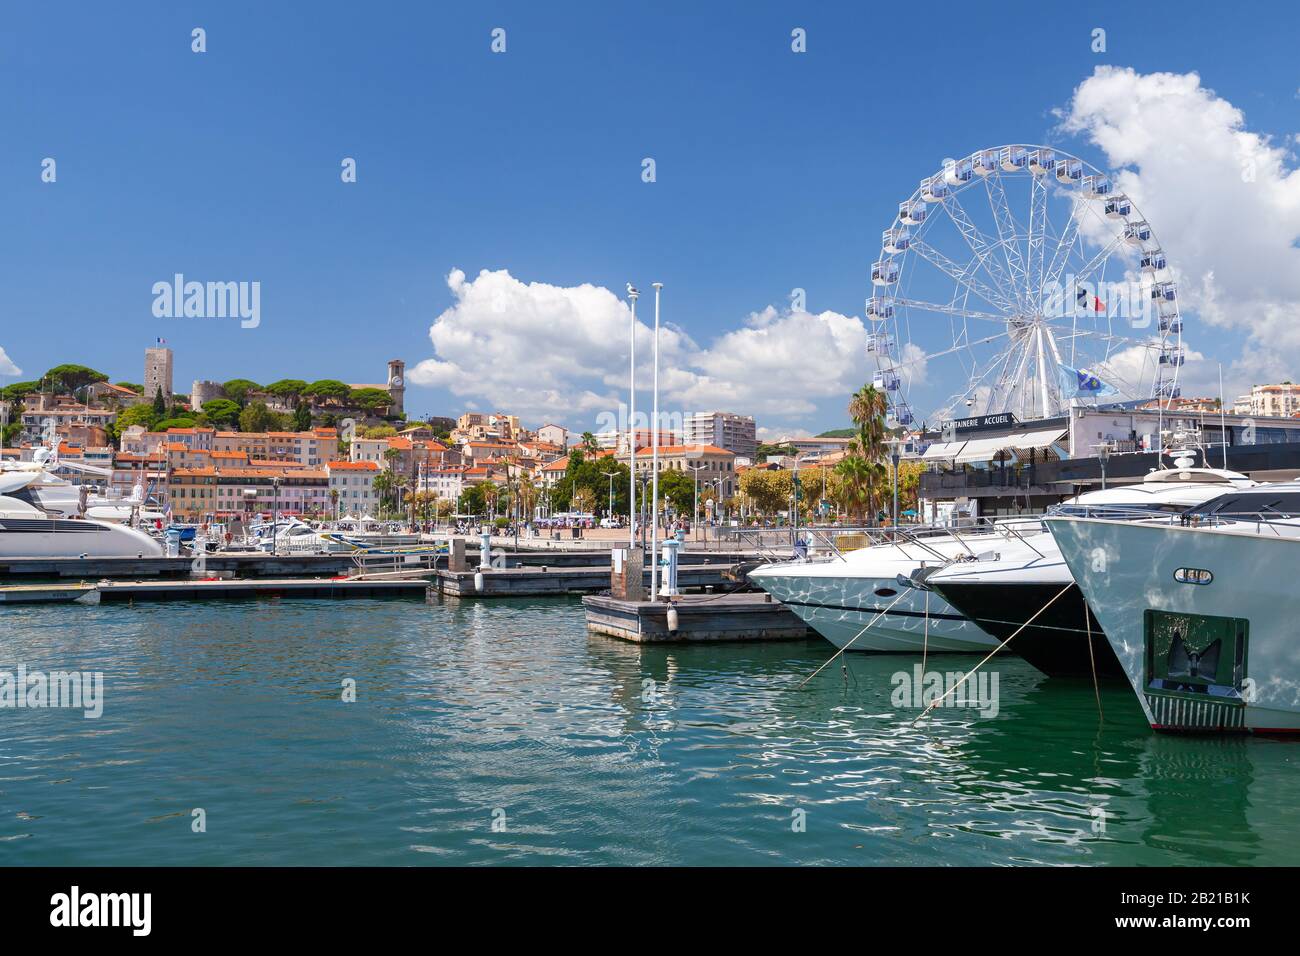 Cannes, France - August 14, 2018: Seaside view of Cannes with Esplanade Pantiero. Ordinary people walk the street Stock Photo